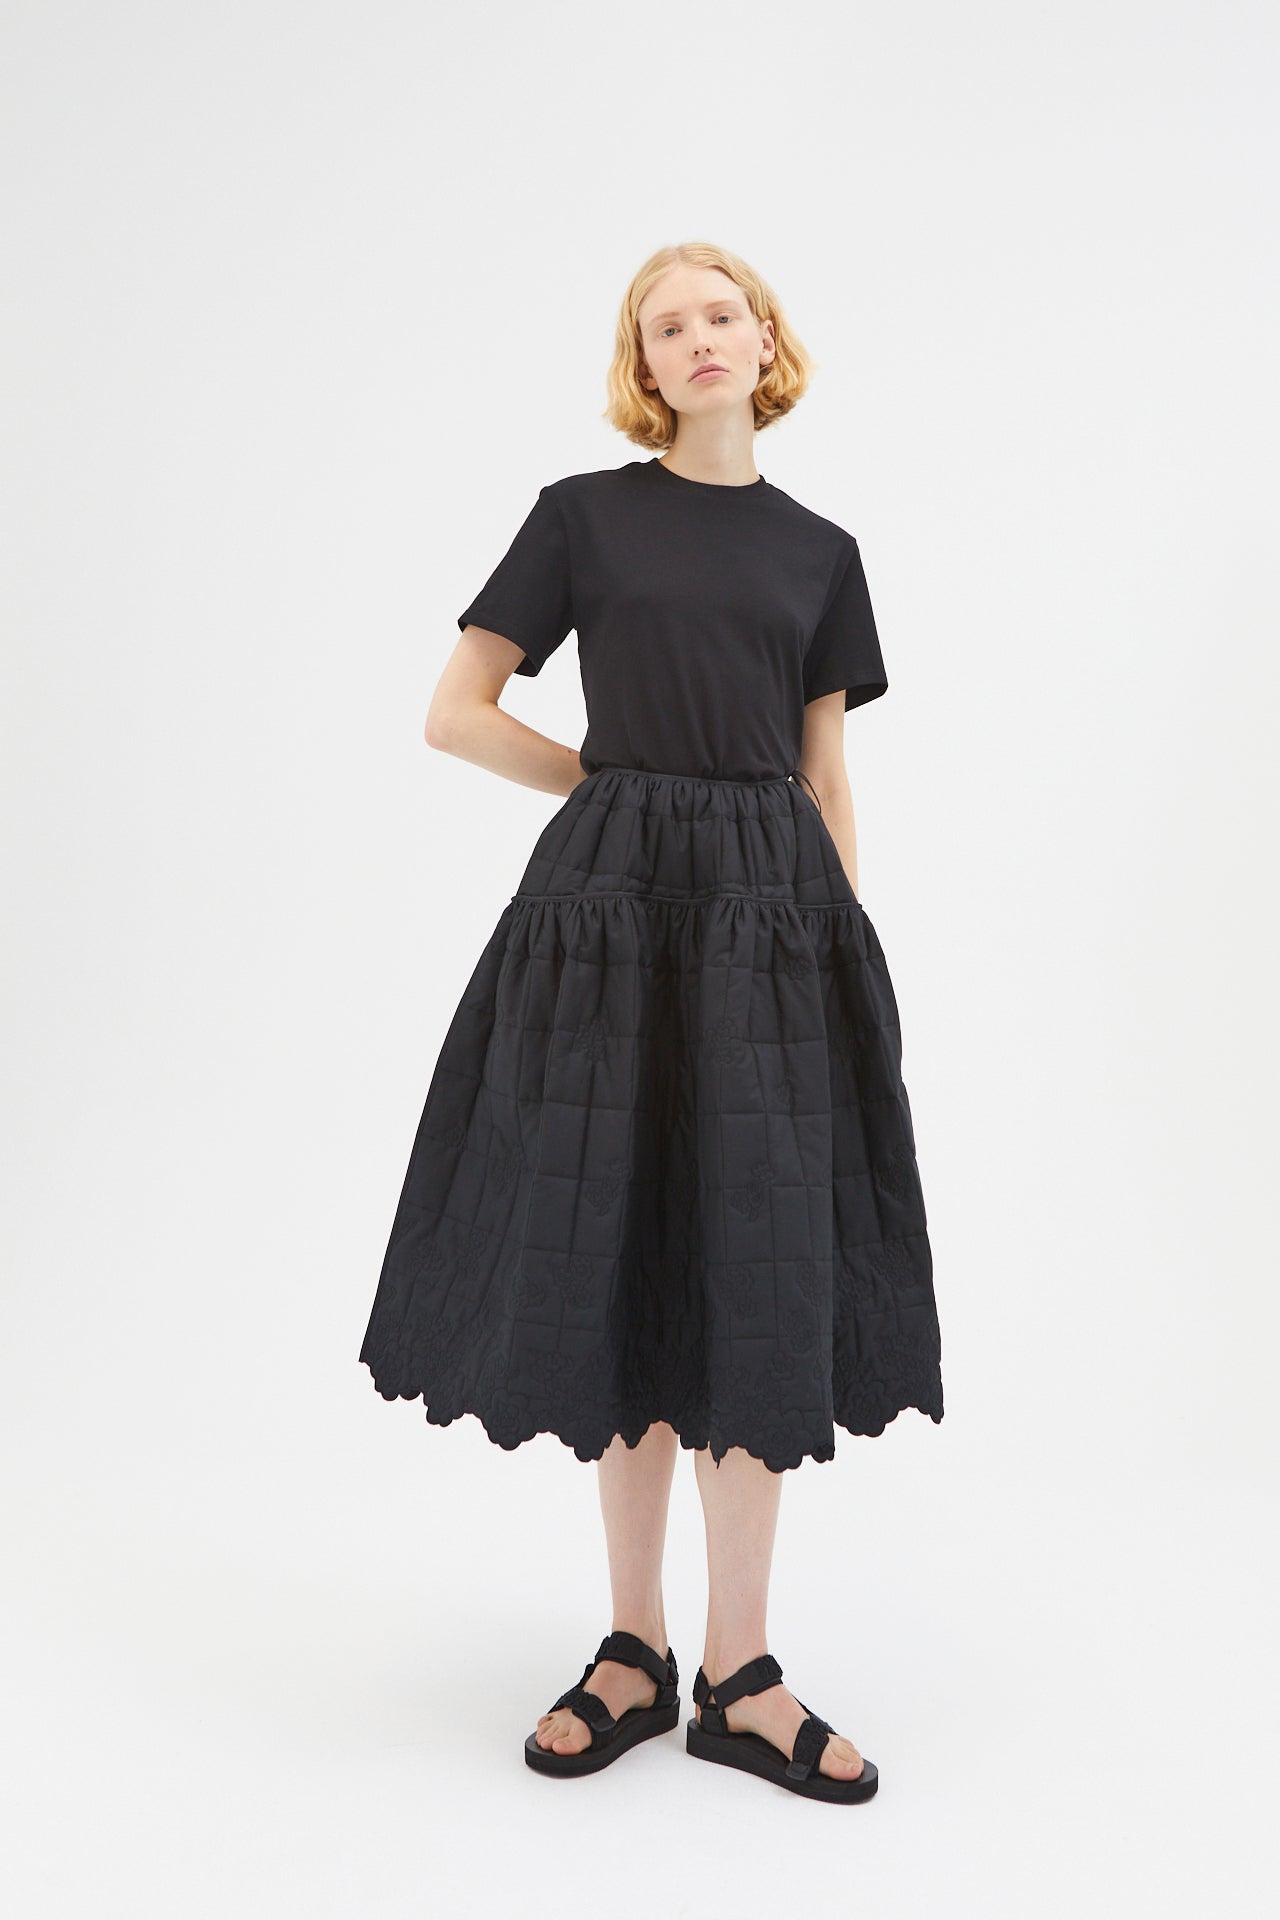 Cecilie Bahnsenrosie Quilted Cotton Skirt